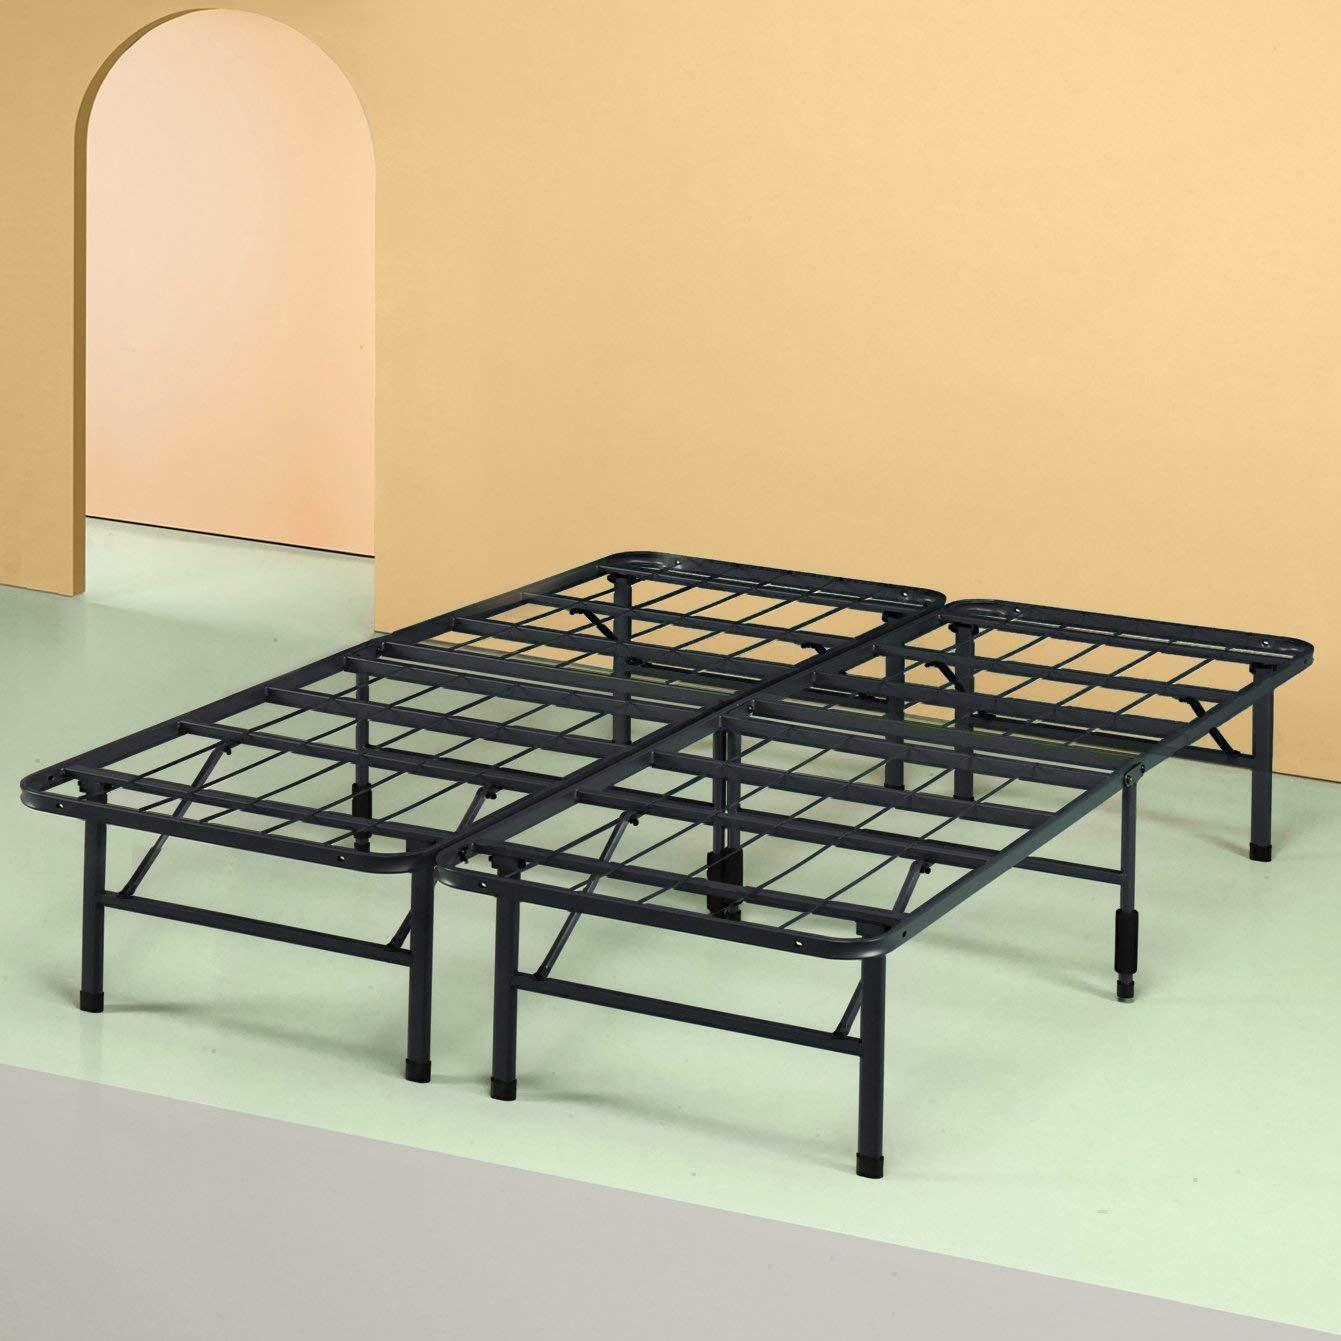 19 Best Metal Bed Frames 2022 The, How To Put Together A Metal Bed Frame With Wheels